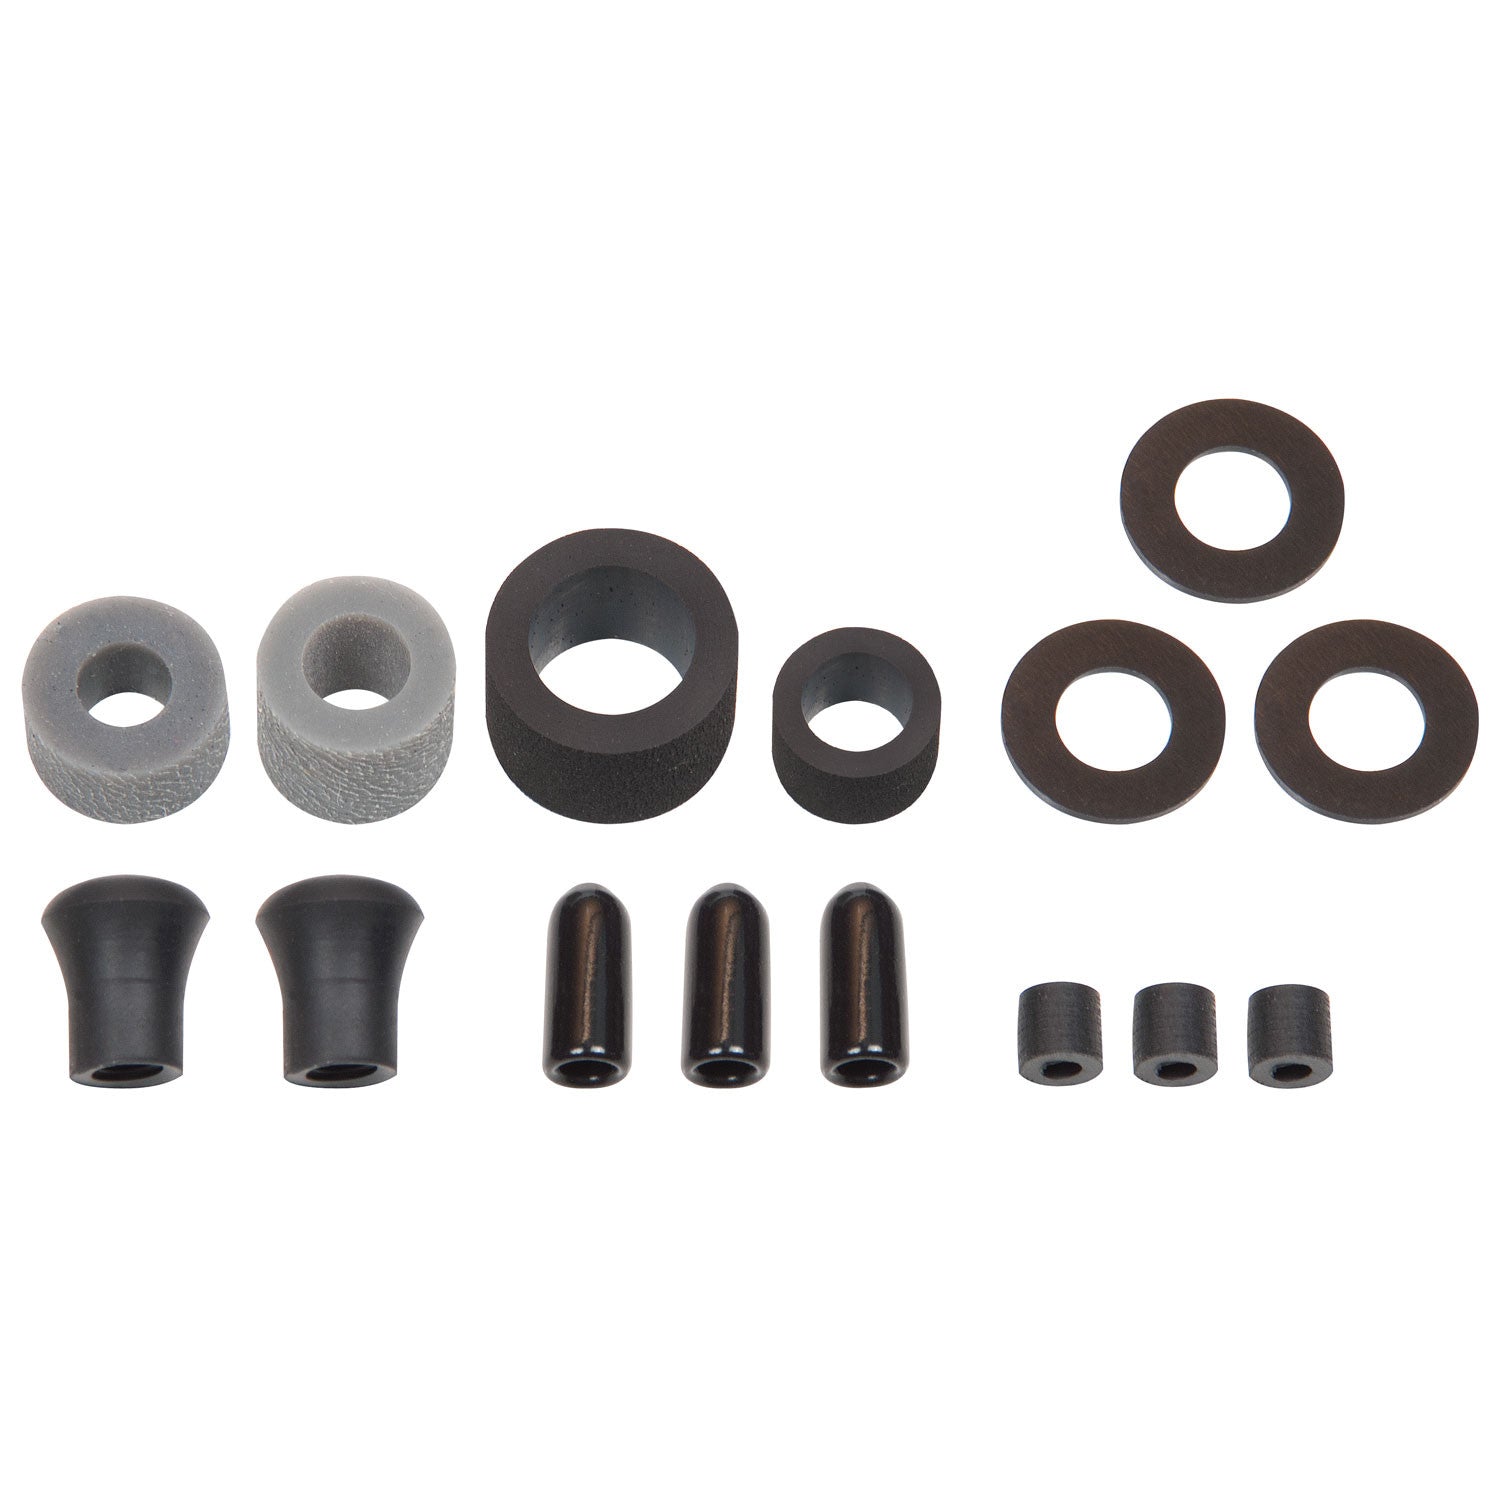 Control and Push Button Tip Assortment for Compact Digital Housings